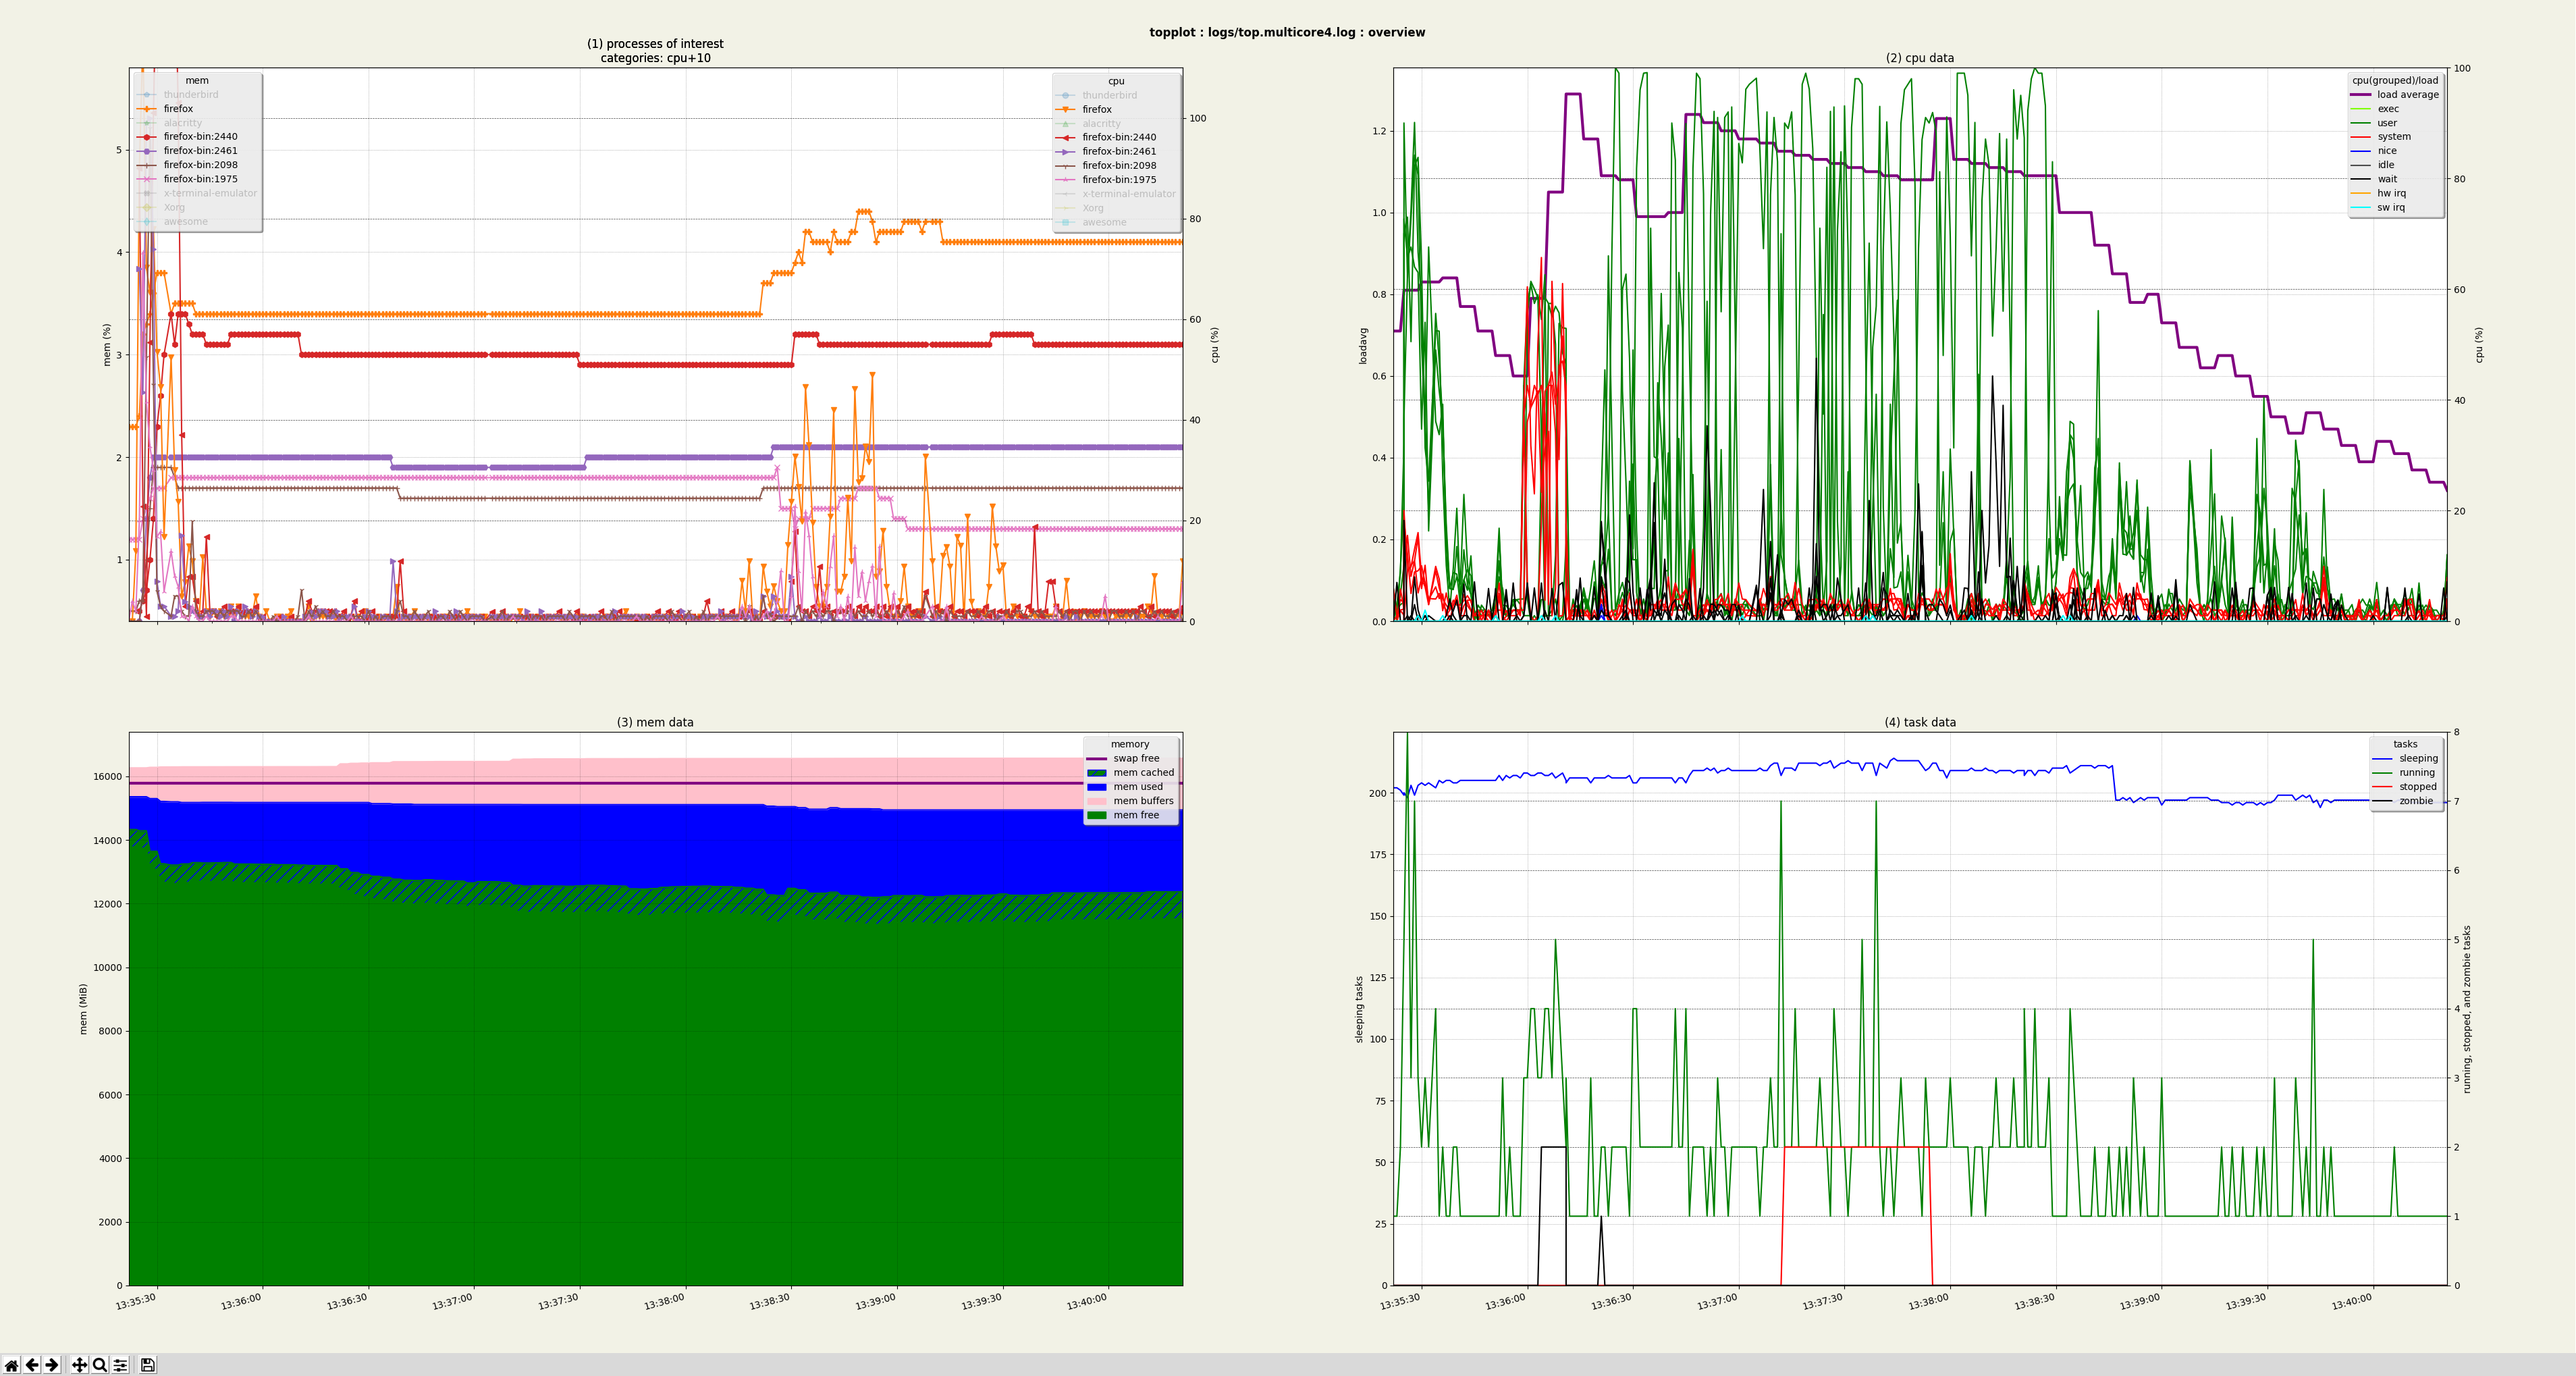 An image of the overview graphs appears here on the website